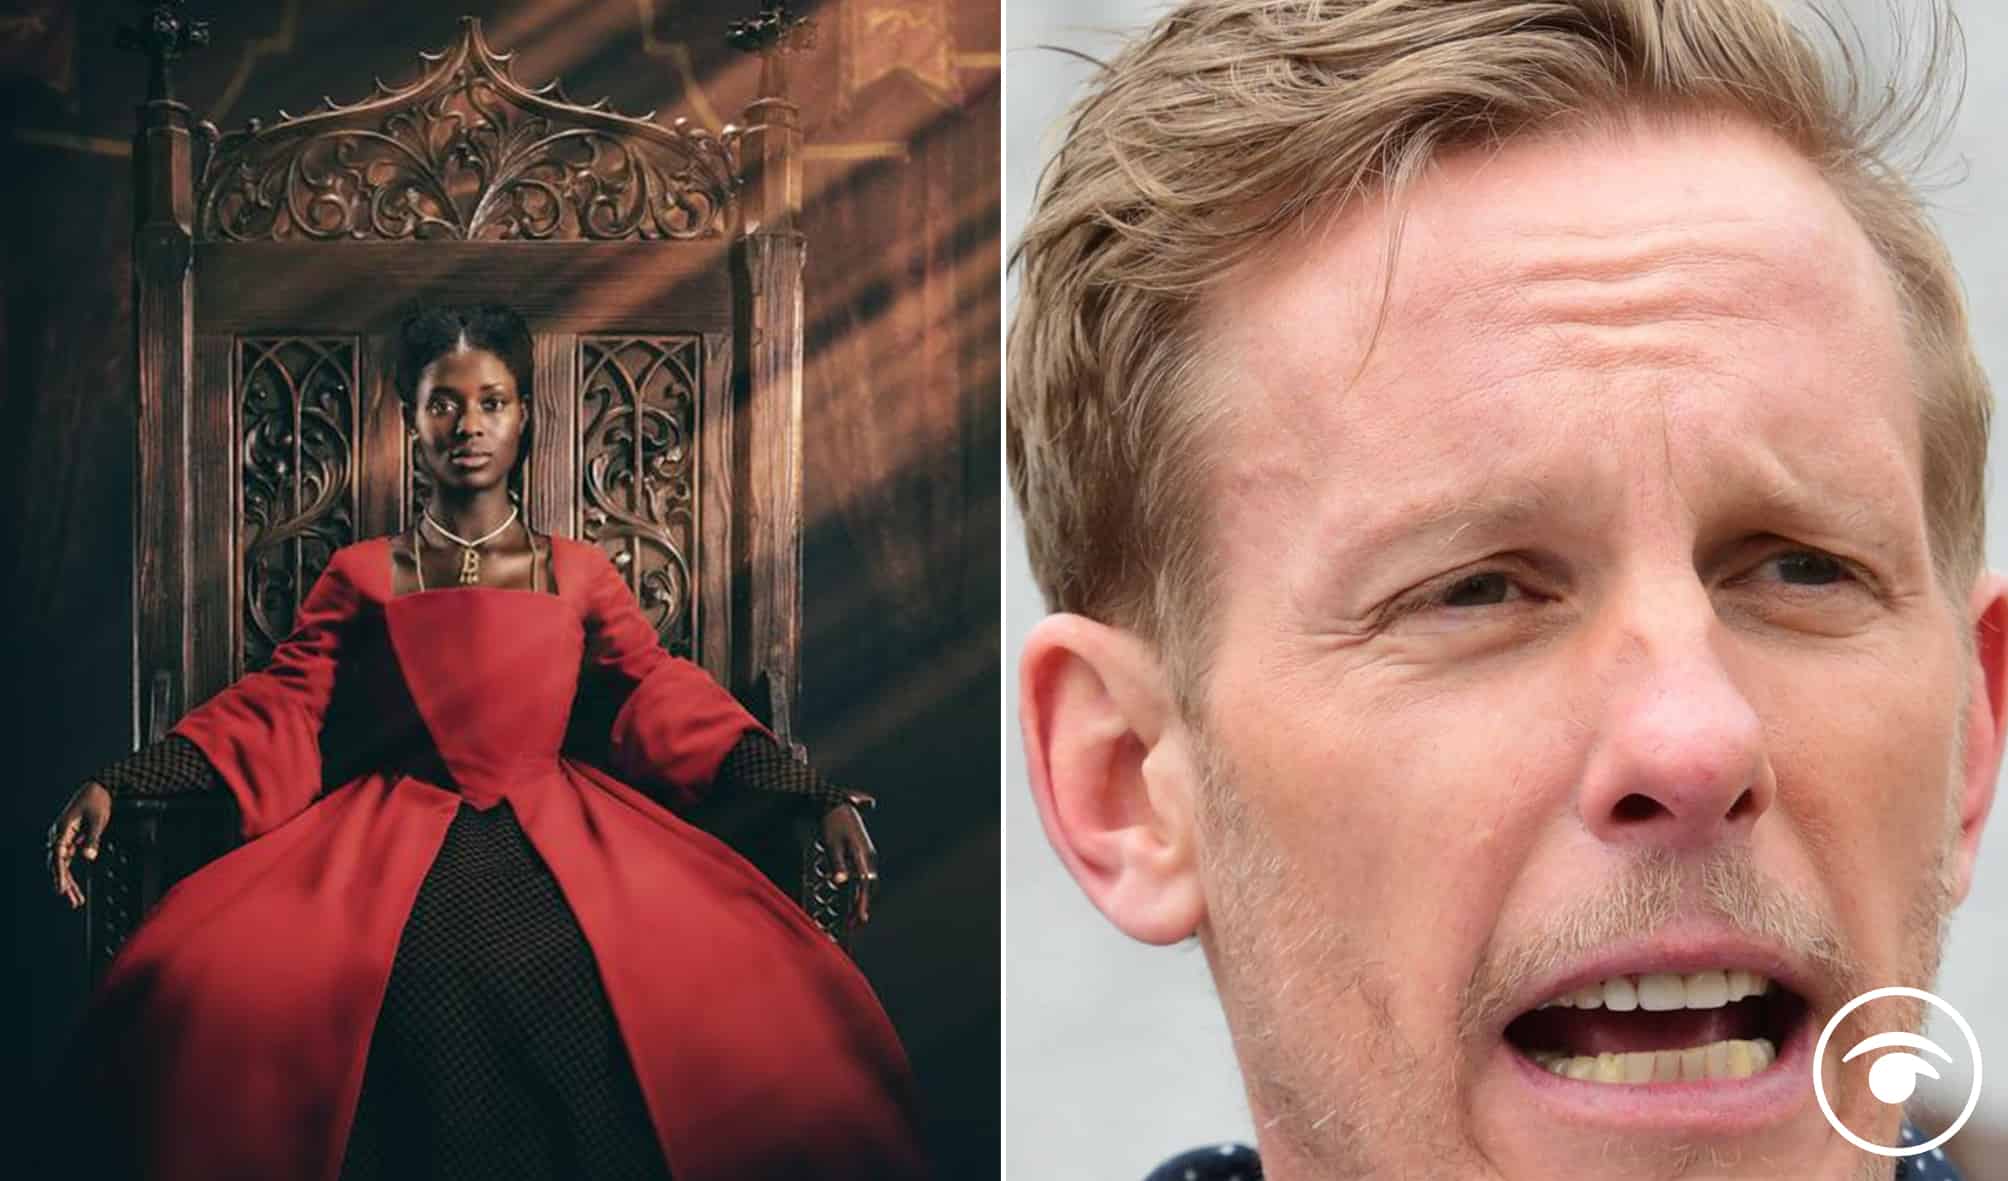 Laurence Fox demands all youths in London are searched and slams black woman as Anne Boleyn